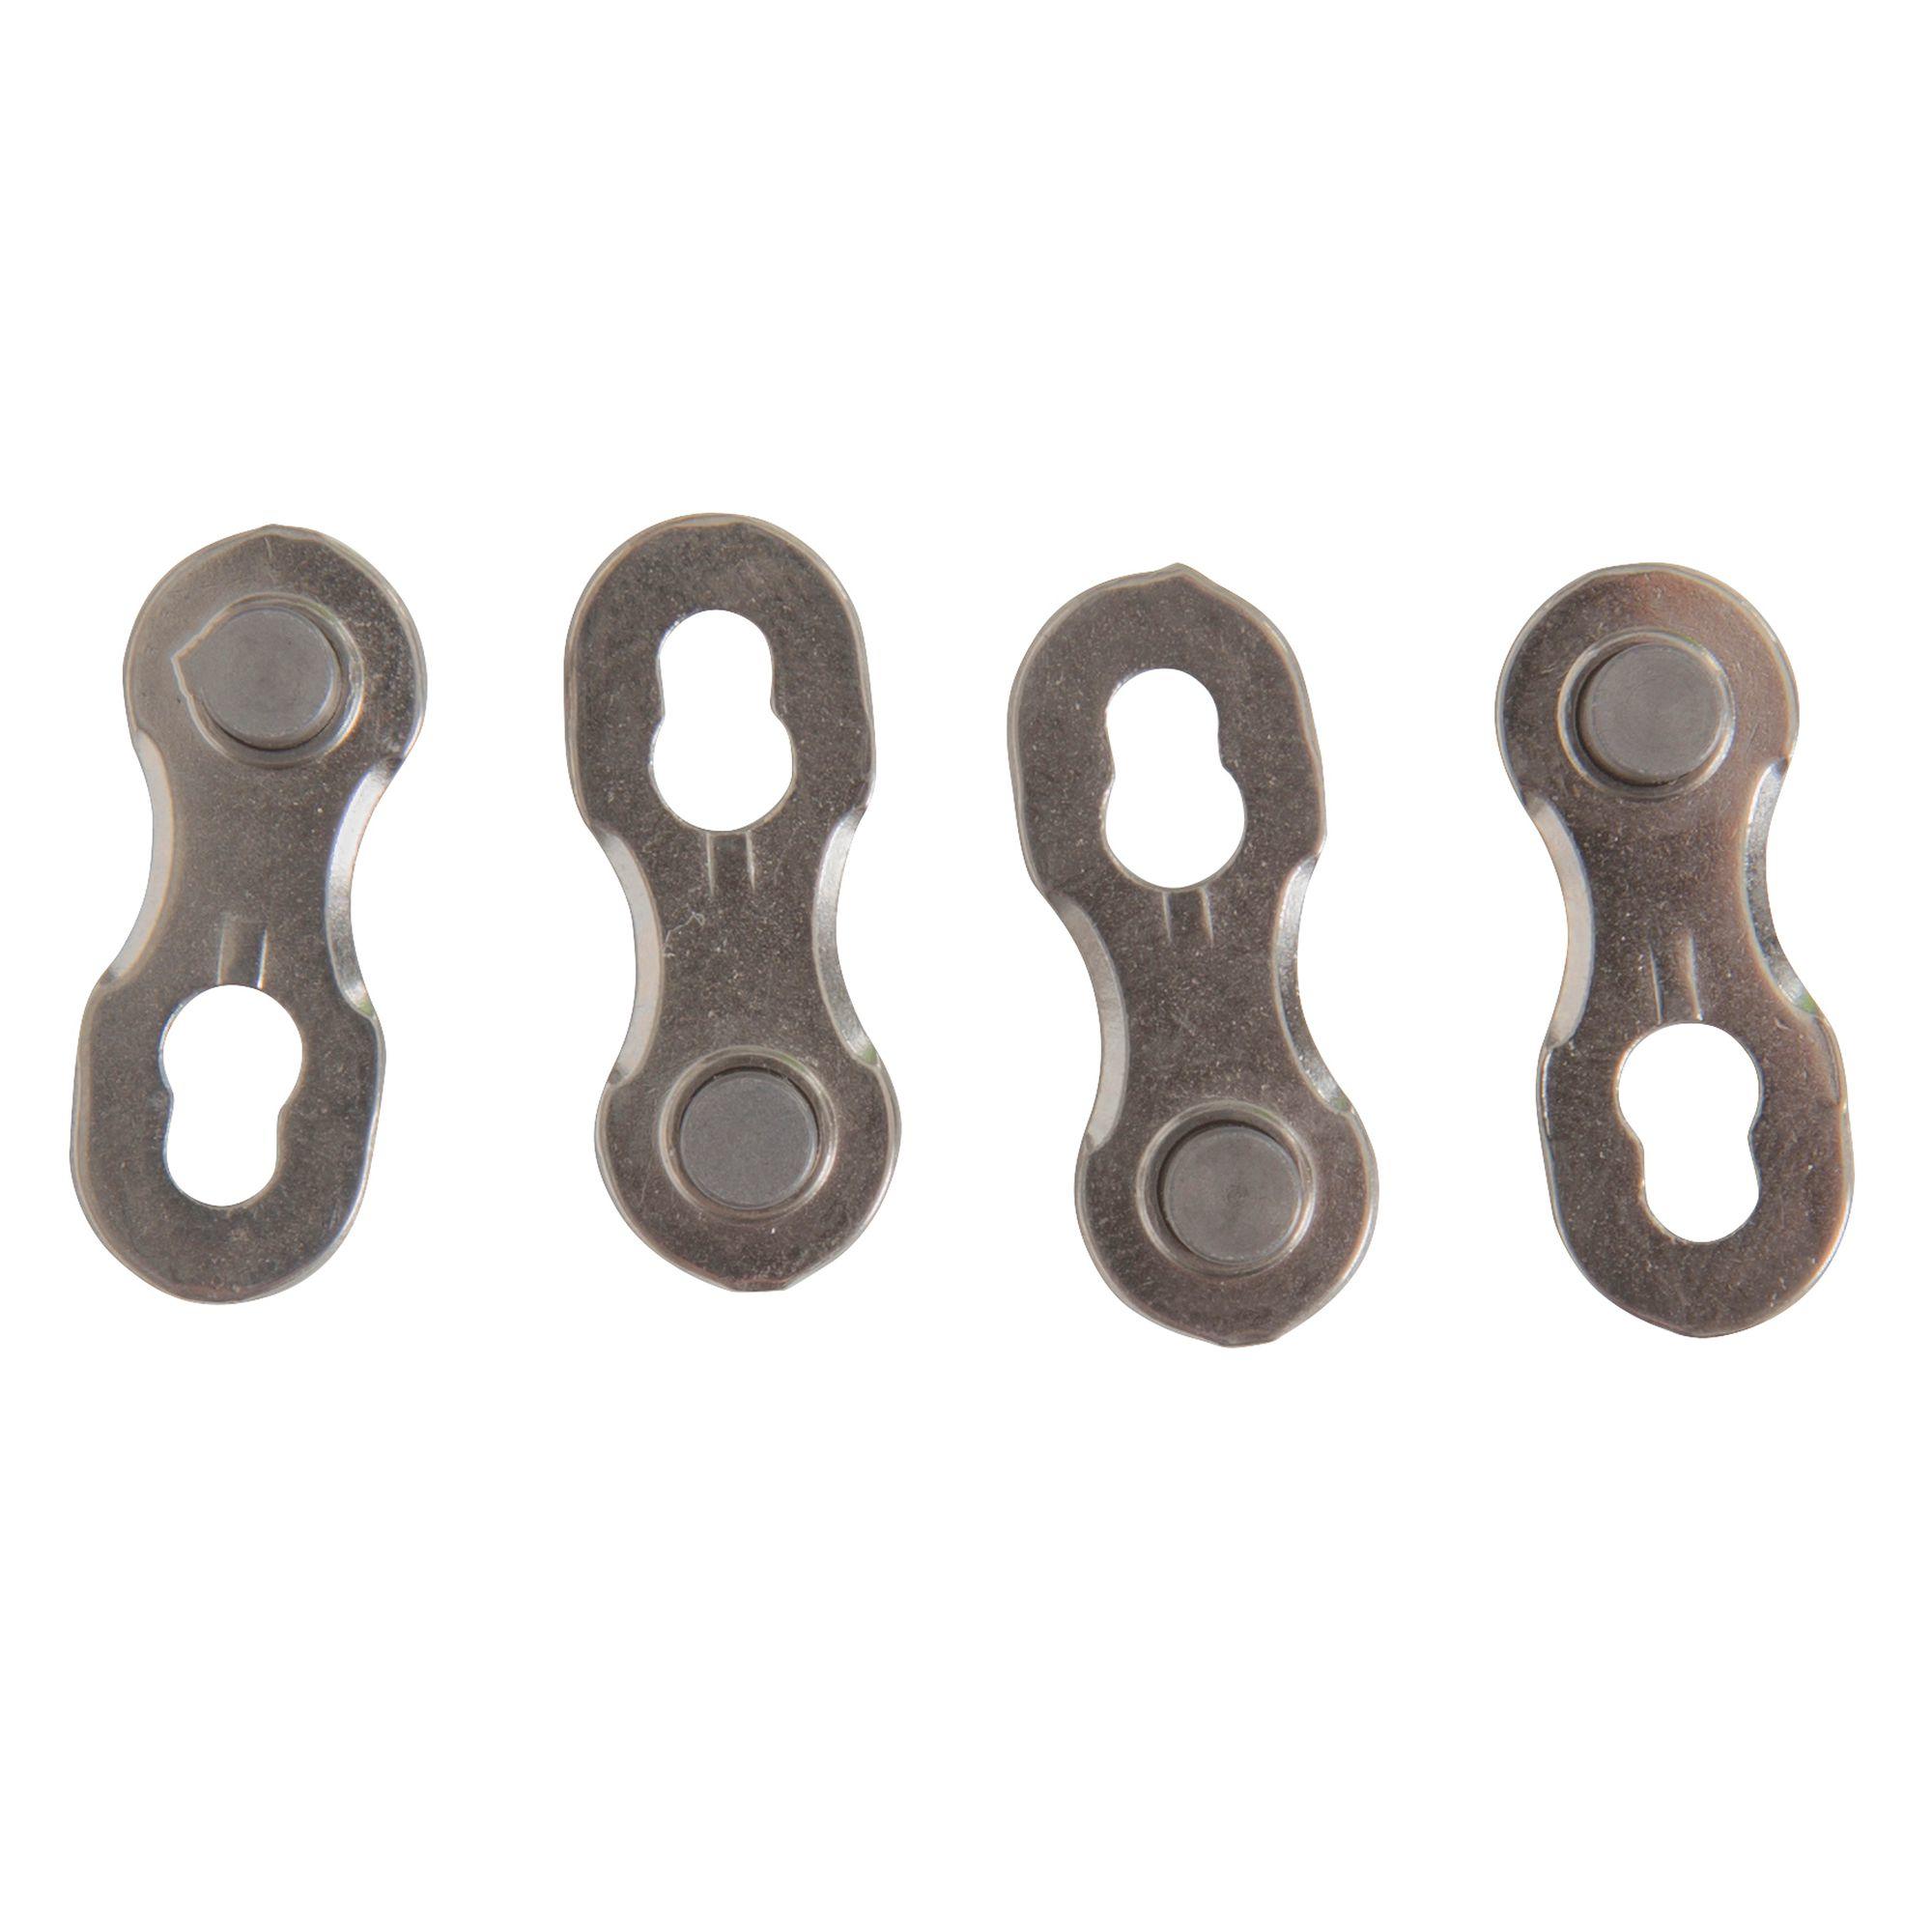 11-Speed Quick Chain Links - Twin Pack - DECATHLON